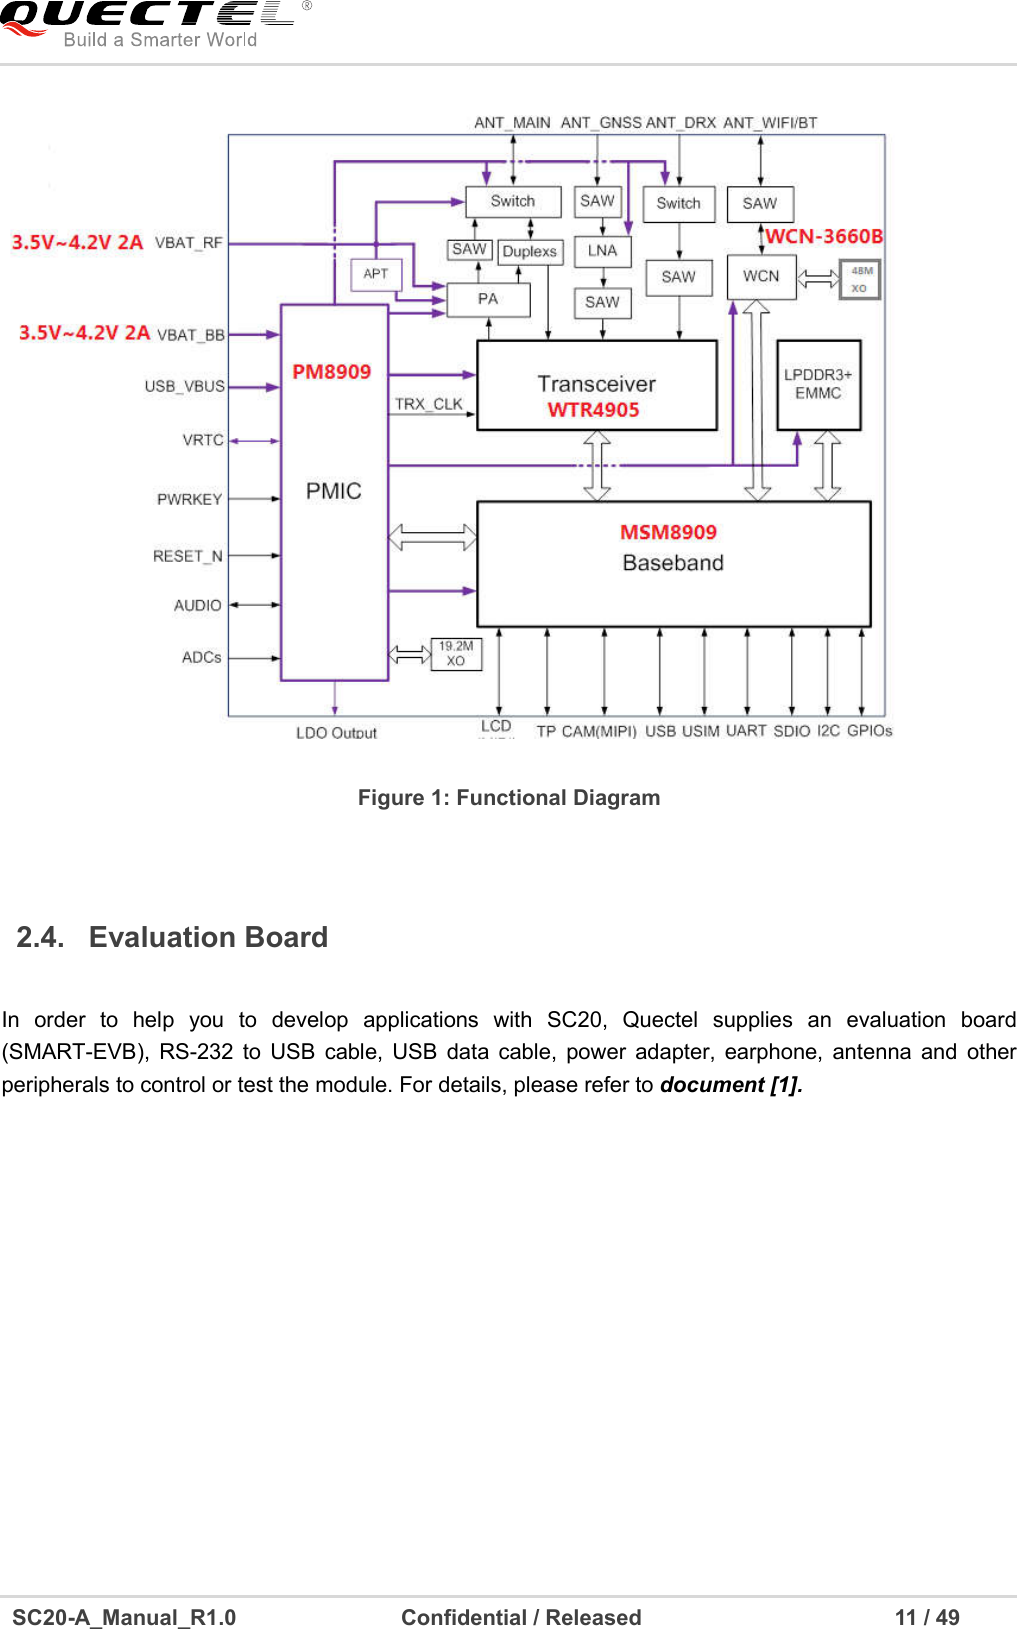     SC20-A_Manual_R1.0                              Confidential / Released                                              11 / 49     Figure 1: Functional Diagram  2.4.  Evaluation Board  In  order  to  help  you  to  develop  applications  with  SC20,  Quectel  supplies  an  evaluation  board (SMART-EVB),  RS-232  to  USB  cable,  USB  data  cable,  power  adapter, earphone,  antenna  and  other peripherals to control or test the module. For details, please refer to document [1]. 